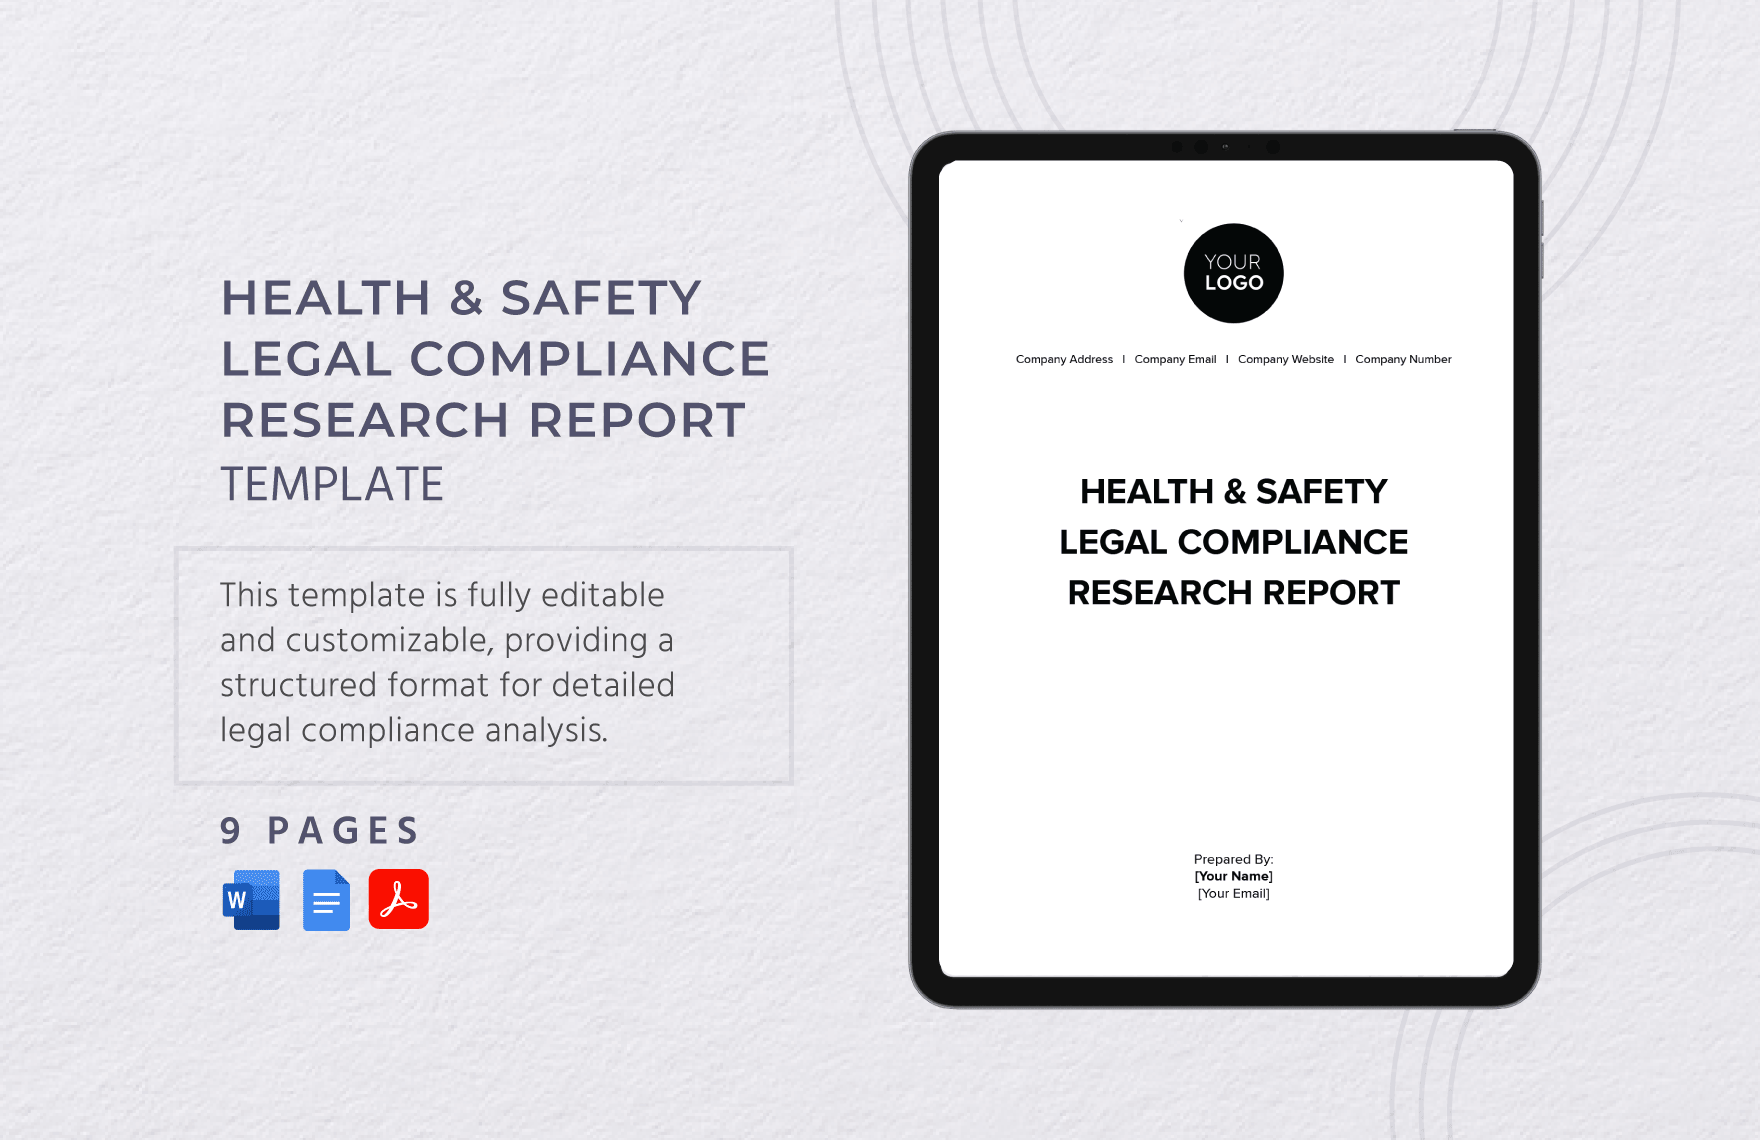 Health & Safety Legal Compliance Research Report Template